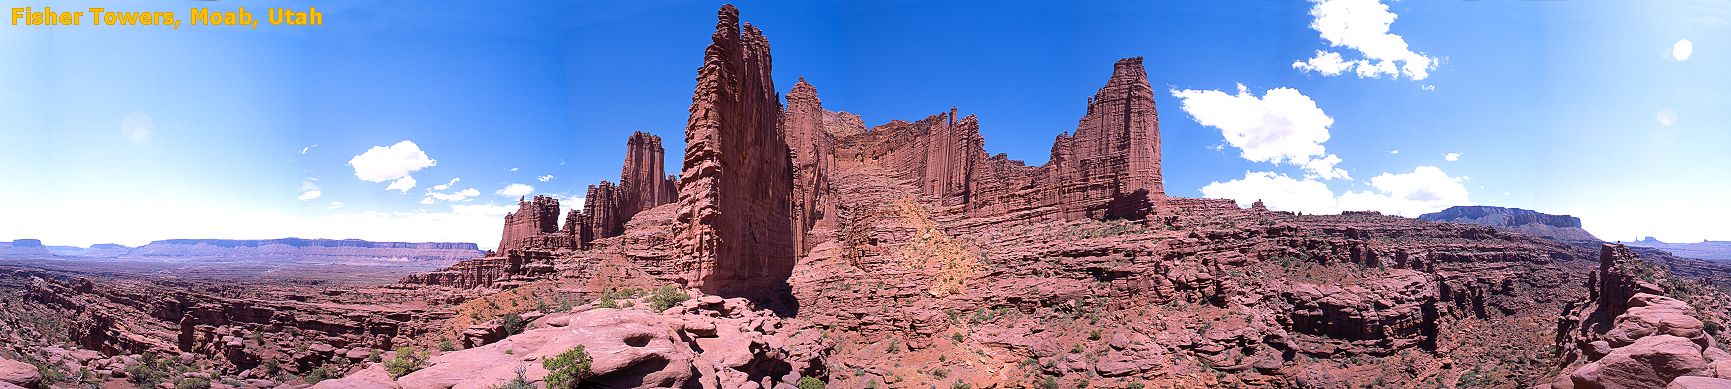 [FisherPano.jpg]
Panorama of the fisher tower. Ancient Art is one of the first small bump on the left, the Titan is the tall tower on the right and Castleton is visible in the background on the far right.